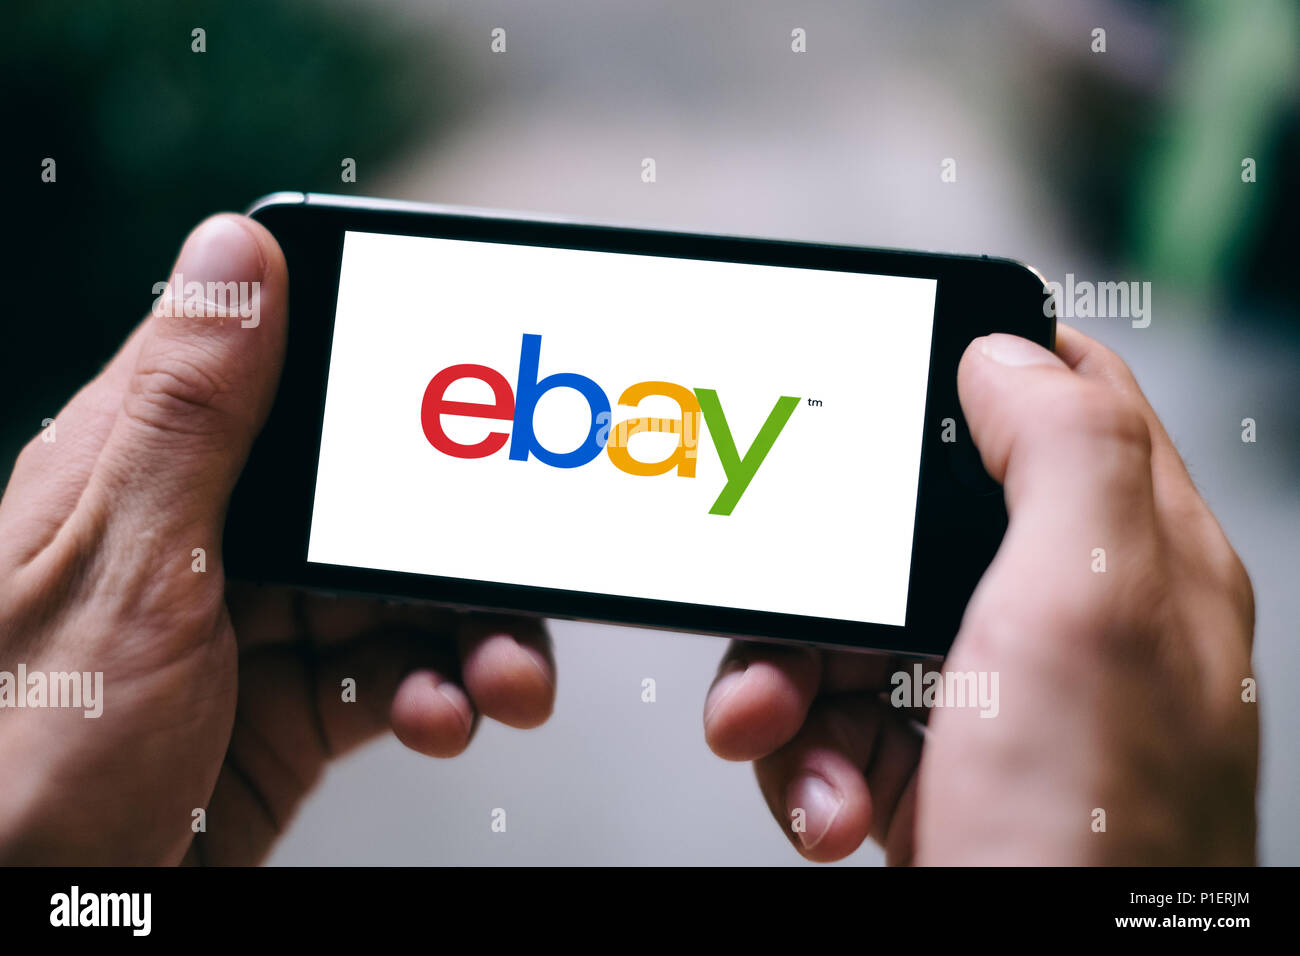 Closeup of iPhone Screen with eBay LOGO or ICON on smartphone Stock Photo